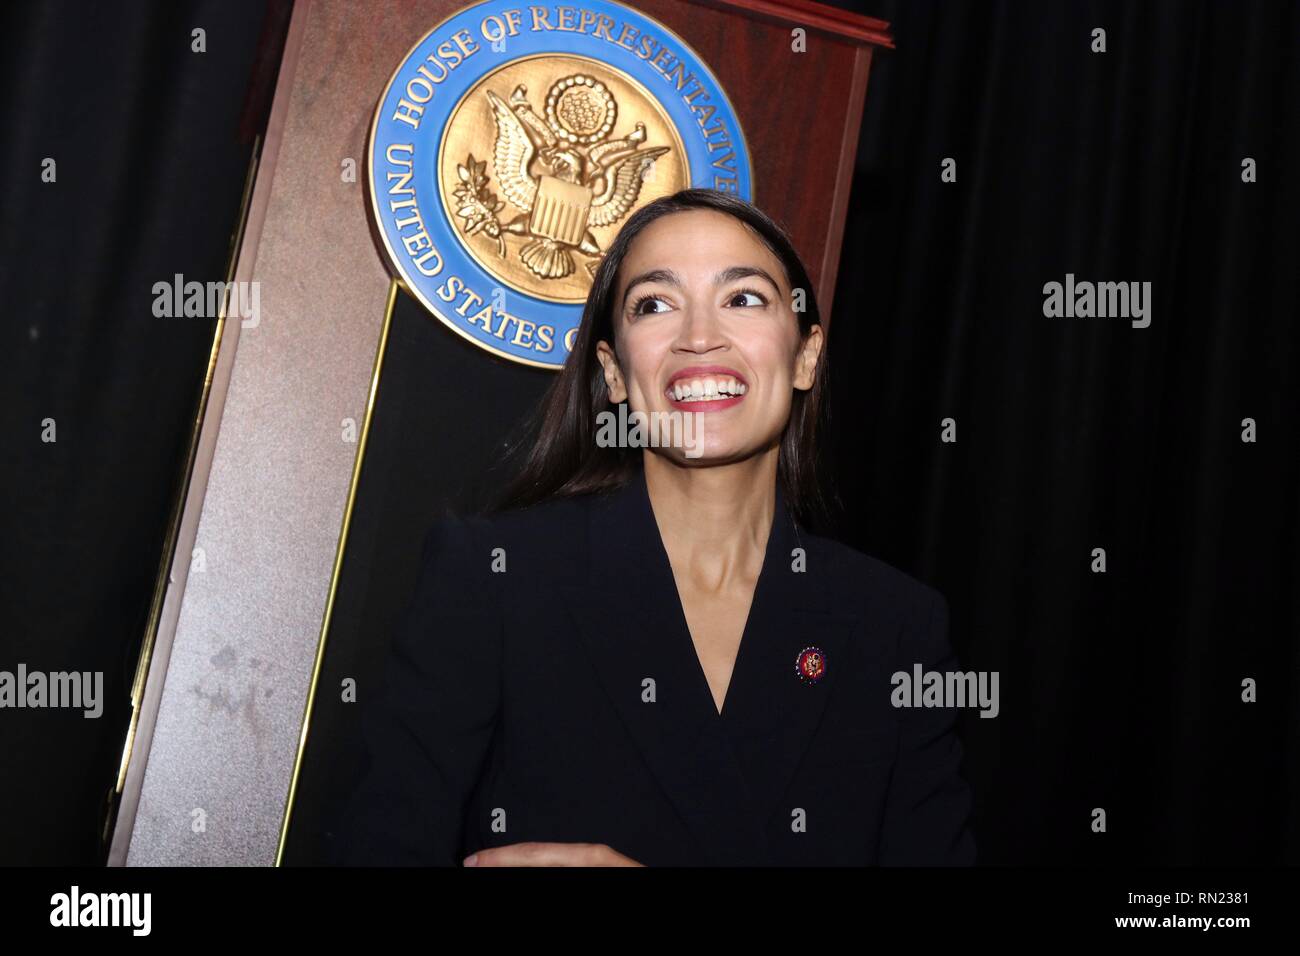 New York City, New York, USA. 16th Feb, 2019. Freshman U.S. Congresswoman Alexandria Ocasio-Cortez (D-NY) has delivered her inaugural address in her Bronx home district on 15 February 2019. The address was delayed because of the recent partial government shutdown. The ceremony featured a ceremonial swearing-in, an address to her constituents and featured speeches by local political leaders and massive display of support from her supporters. Credit: G. Ronald Lopez/ZUMA Wire/Alamy Live News Stock Photo